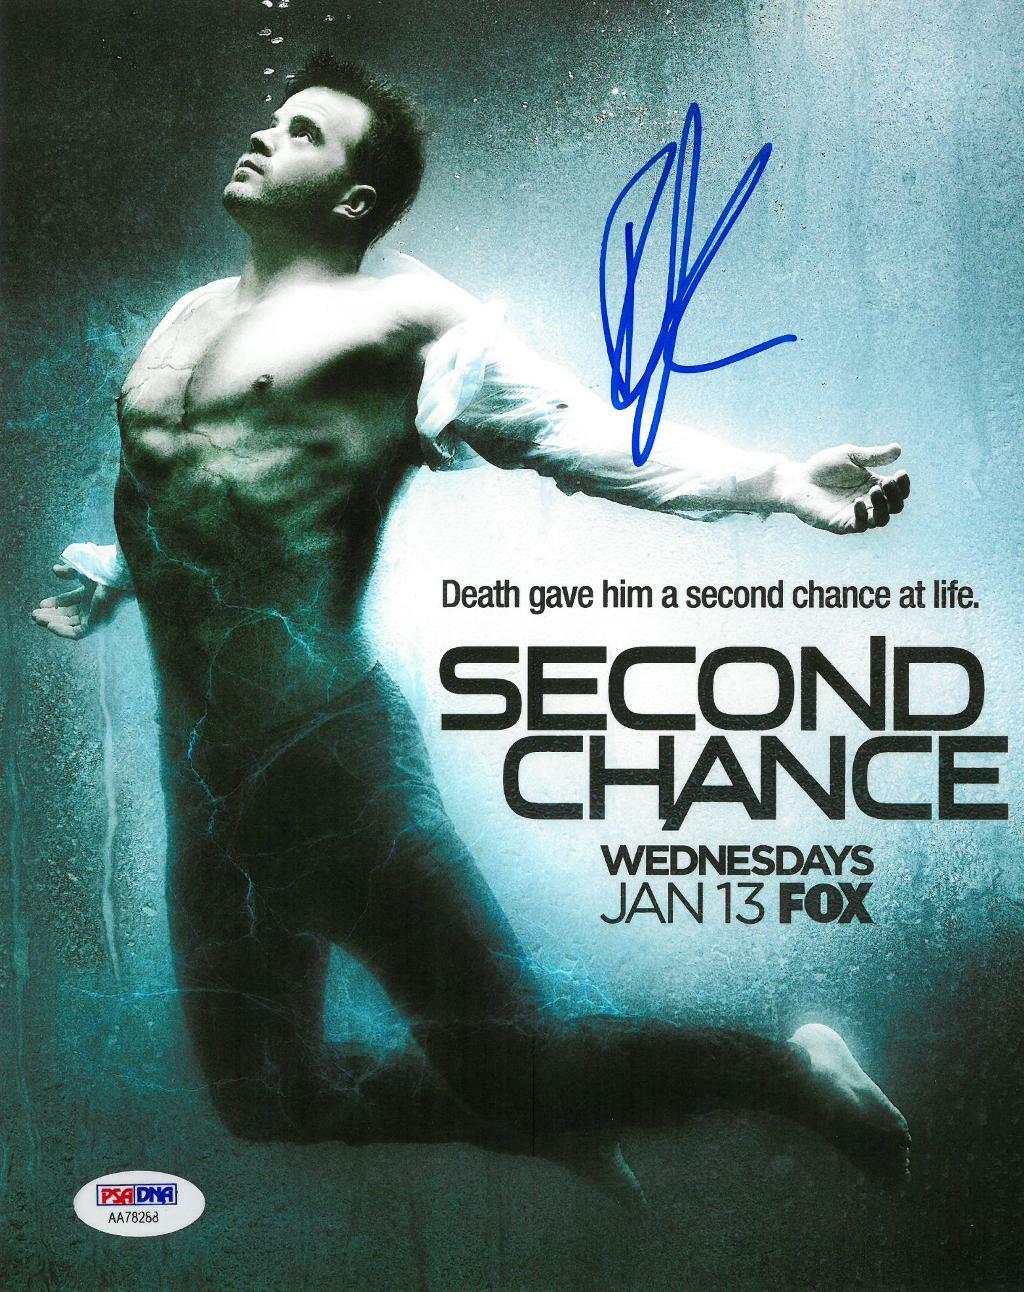 Robert Kazinsky Signed Second Chance Autographed 8x10 Photo Poster painting PSA/DNA #AA78288